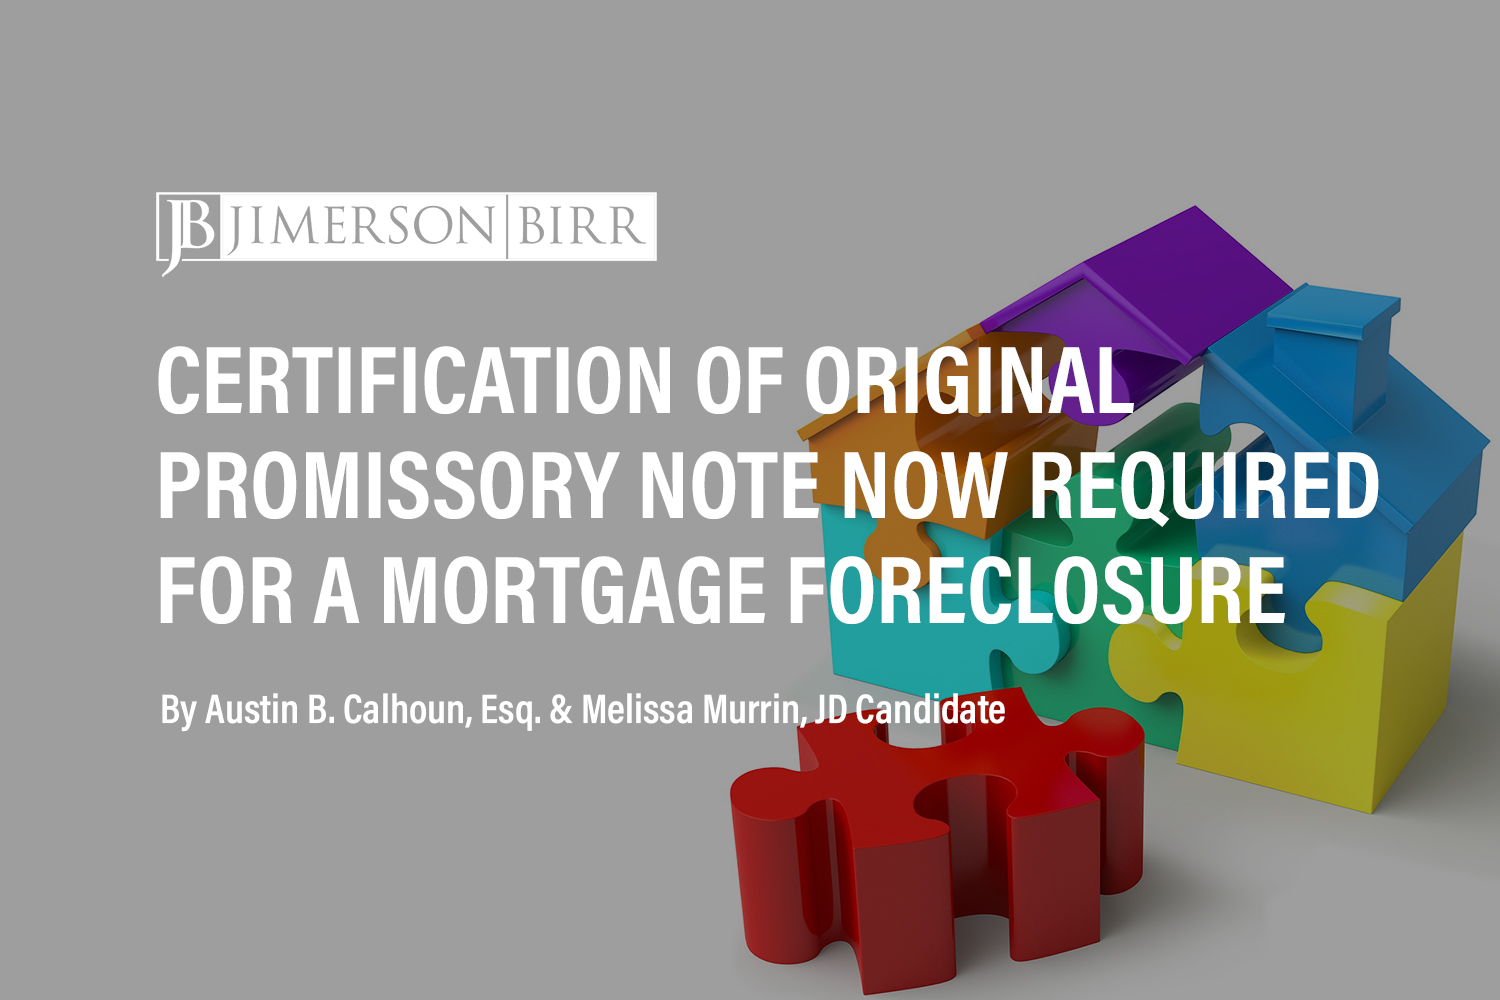 Certification of Original Promissory Note is Required to Bring a Mortgage Foreclosure Action